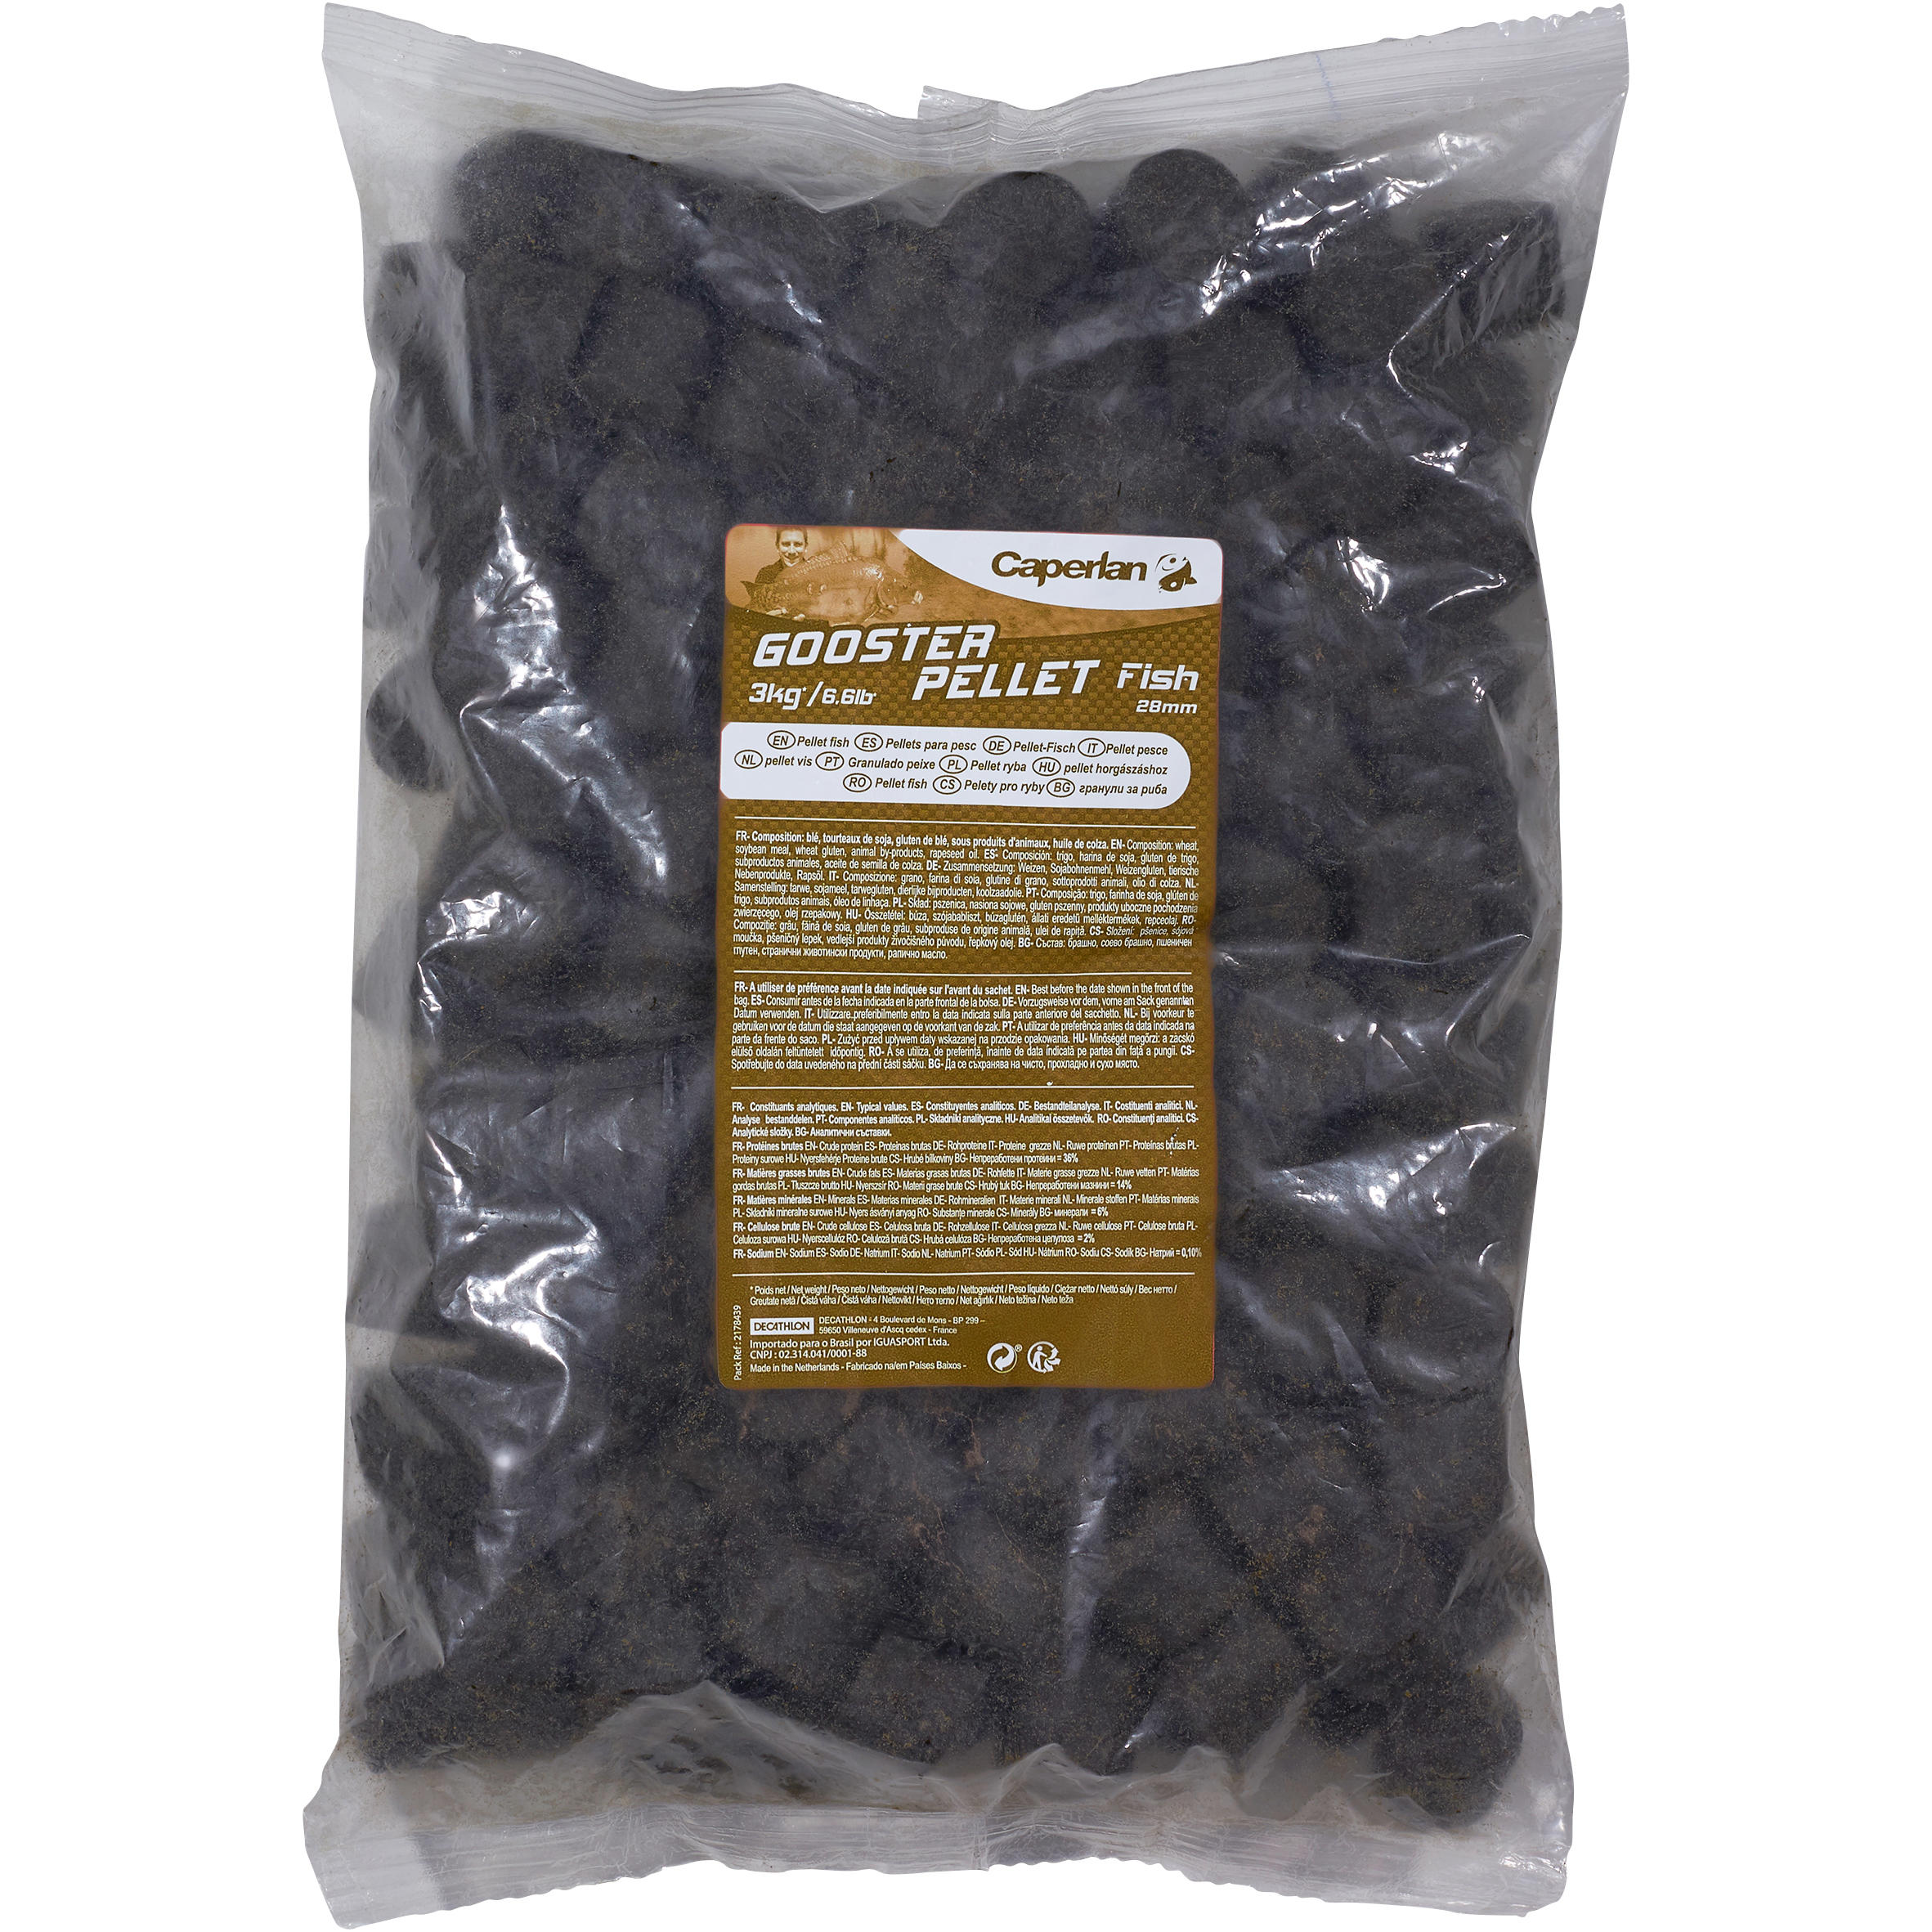 Gooster Fish Catfish and Carp Fishing Pellets 28mm 3kg 4/7